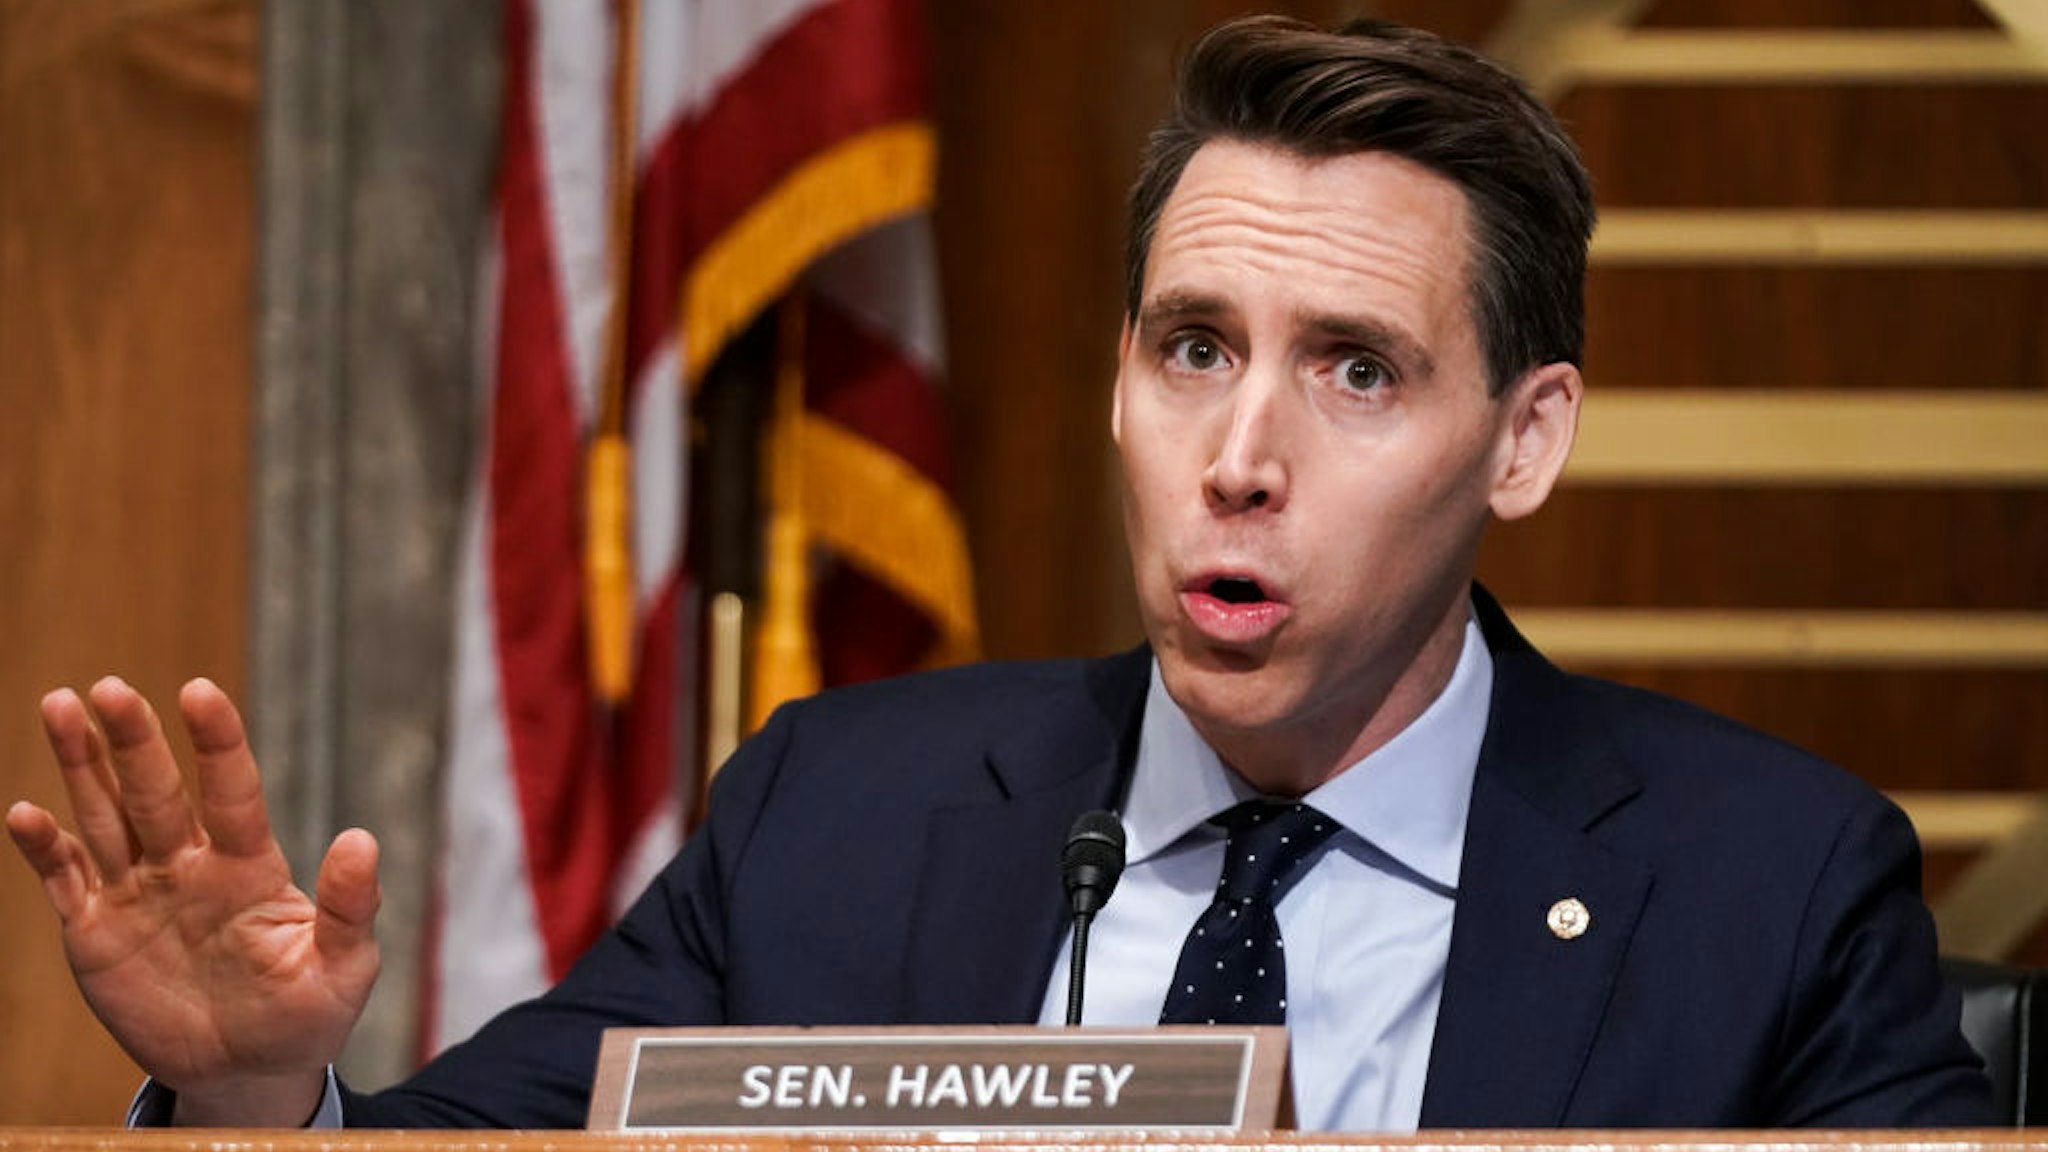 WASHINGTON, DC - DECEMBER 16: Sen. Josh Hawley (R-MO) asks questions during a Senate Homeland Security and Governmental Affairs Committee hearing to discuss election security and the 2020 election process on December 16, 2020 in Washington, DC. U.S. President Donald Trump continues to push baseless claims of voter fraud during the presidential election, which Chris Krebs called the most secure in American history. (Photo by Greg Nash-Pool/Getty Images)